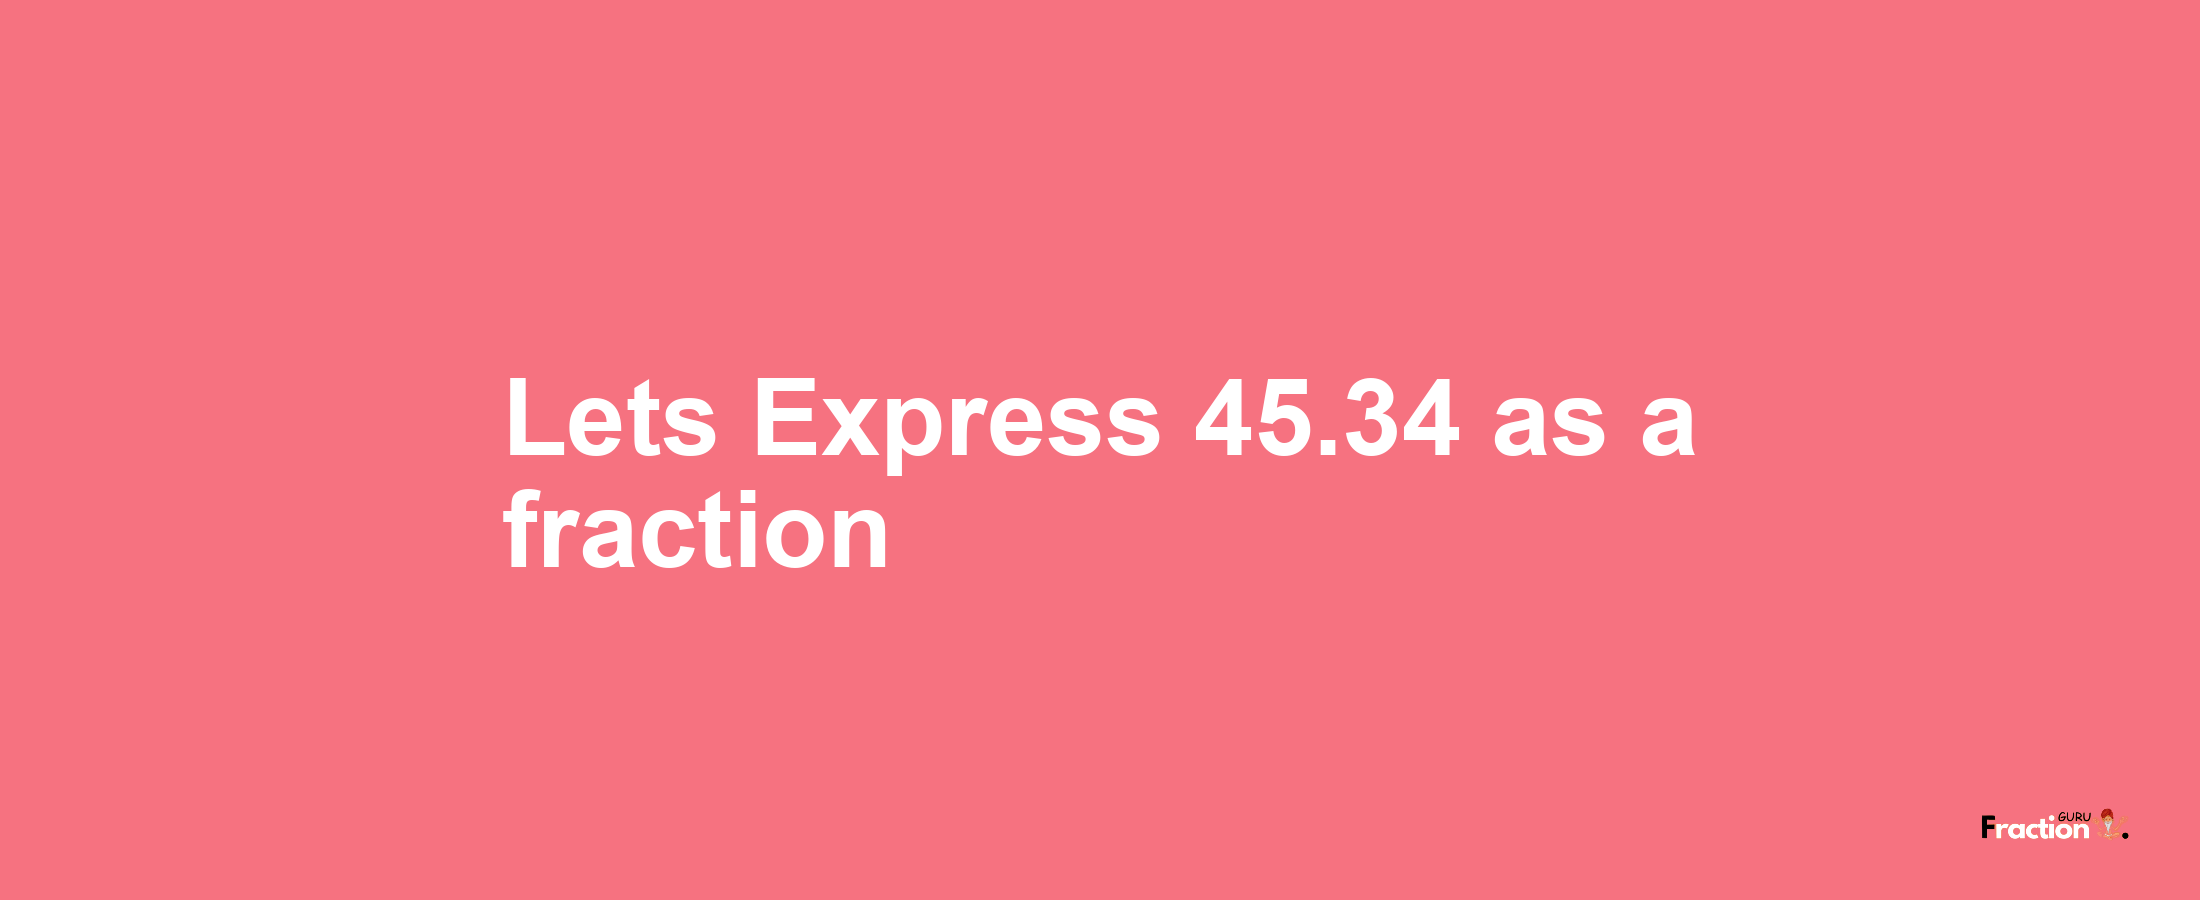 Lets Express 45.34 as afraction